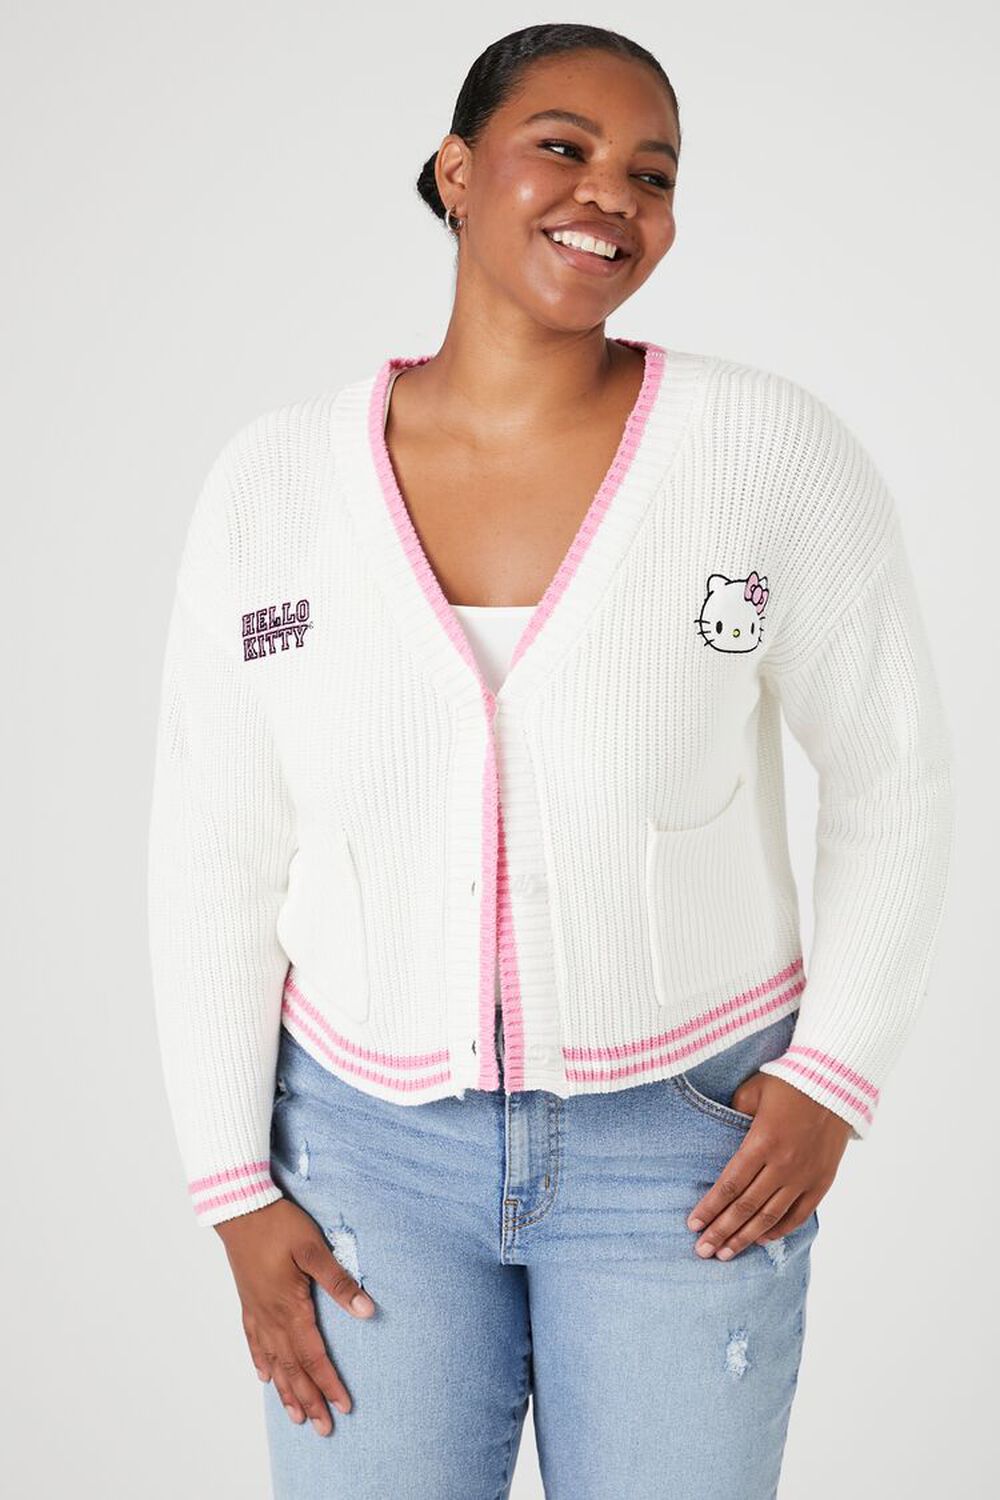 Forever 21 Just Dropped a Hello Kitty Line, and It's Everything